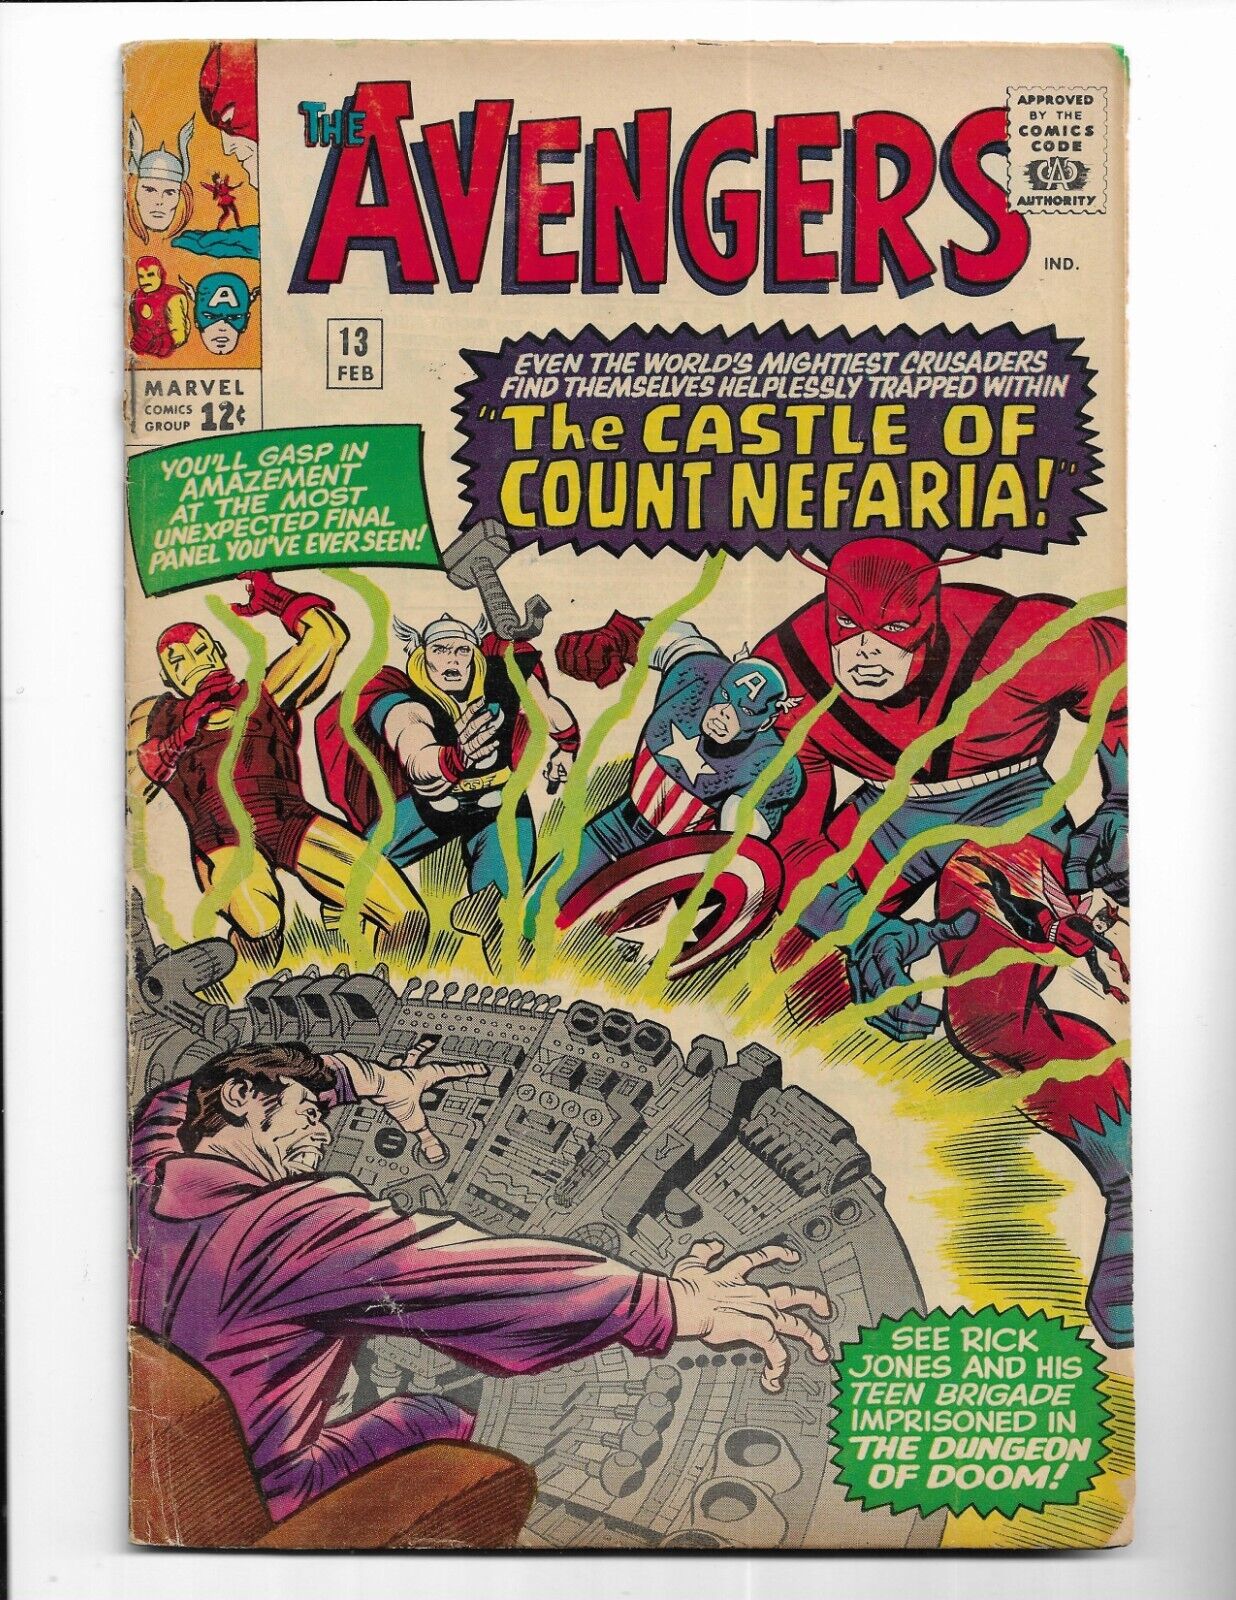 AVENGERS 13 - VG+ 4.5 - 1ST APPEARANCE OF COUNT NEFARIA - THOR - IRON MAN (1965)